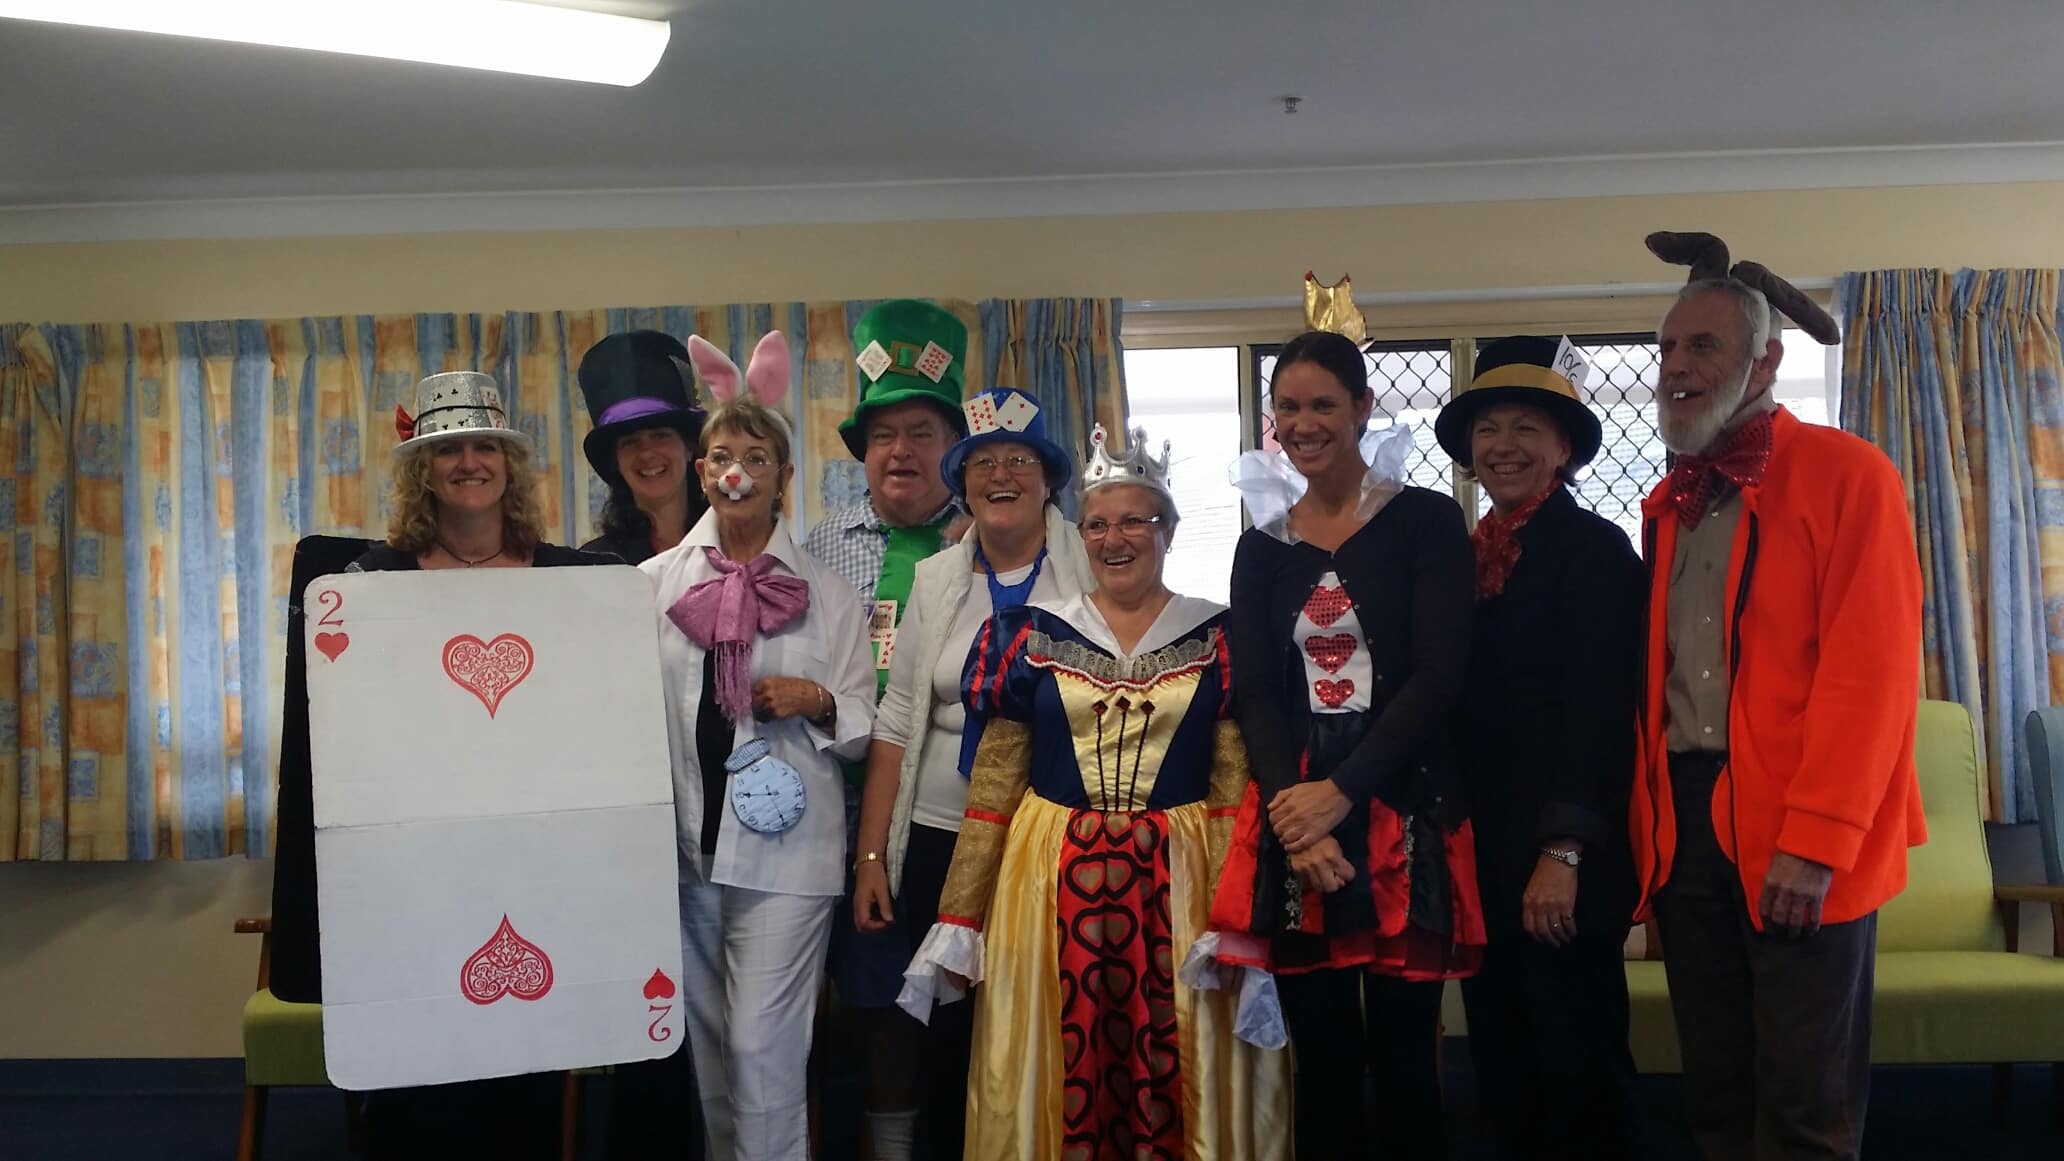 Madder Hatters party at aged care home